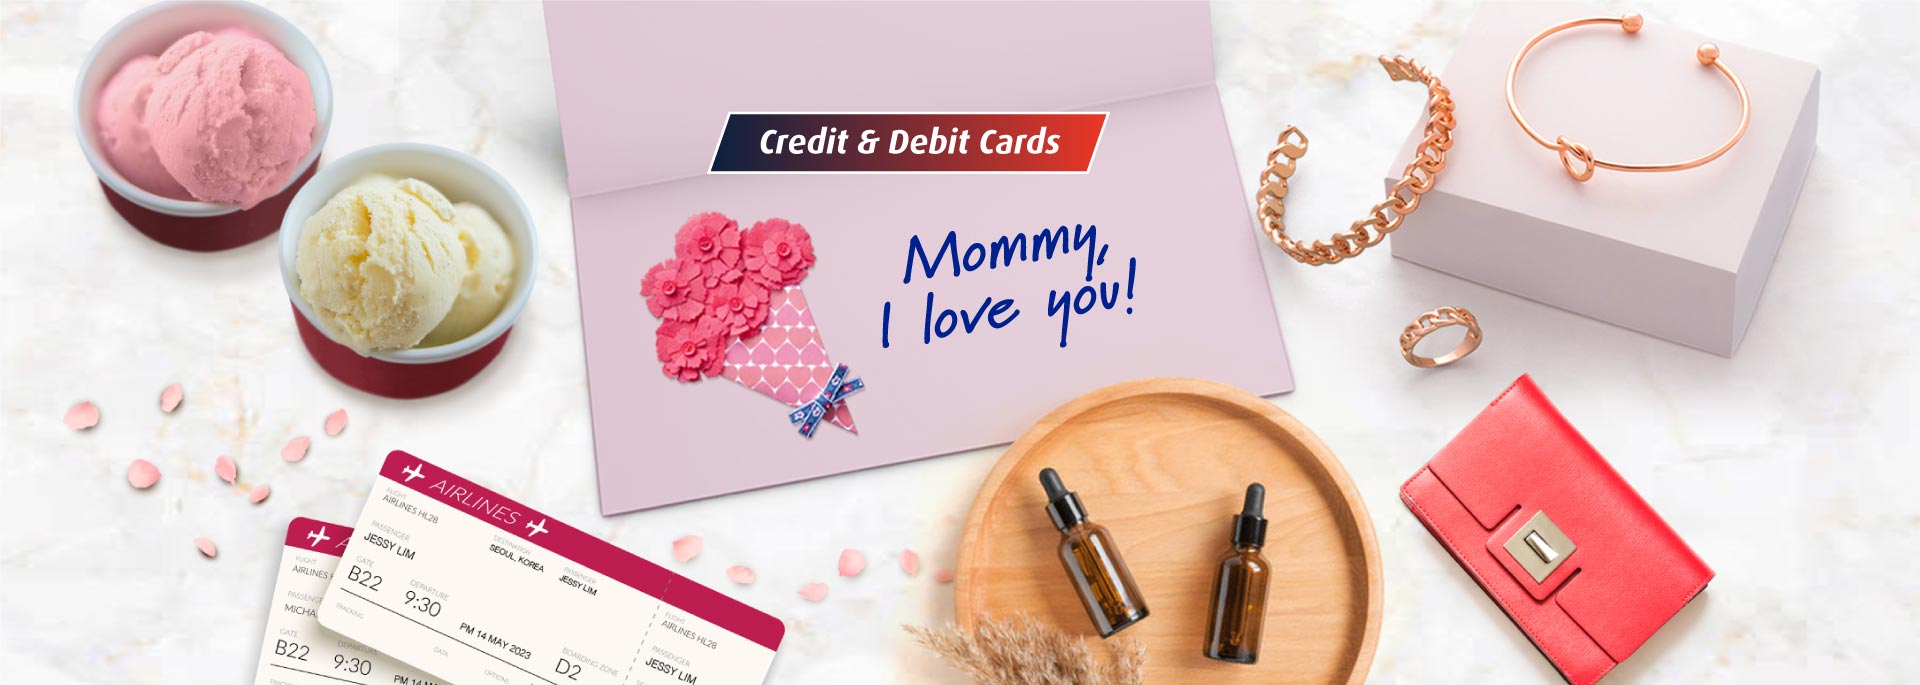 Enjoy exclusive card offers this Mother's Day